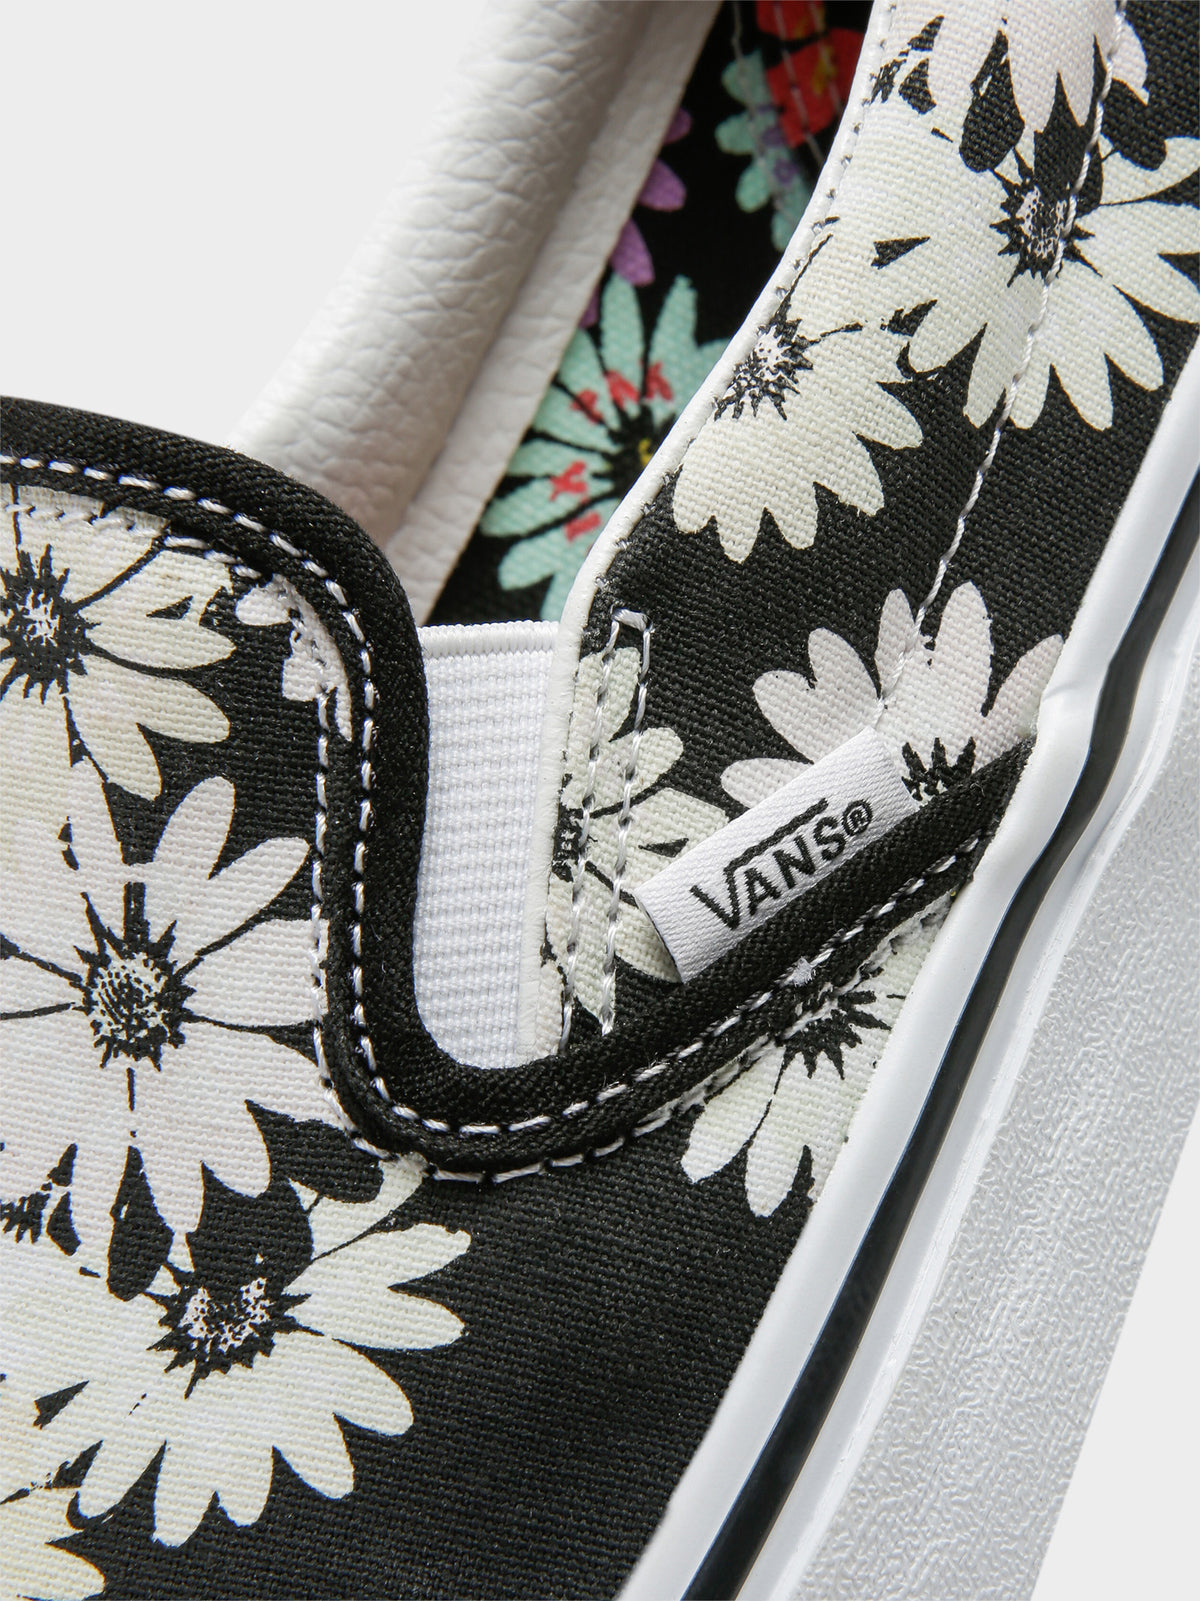 Womens Classic Slip On Sneakers in Peace Floral